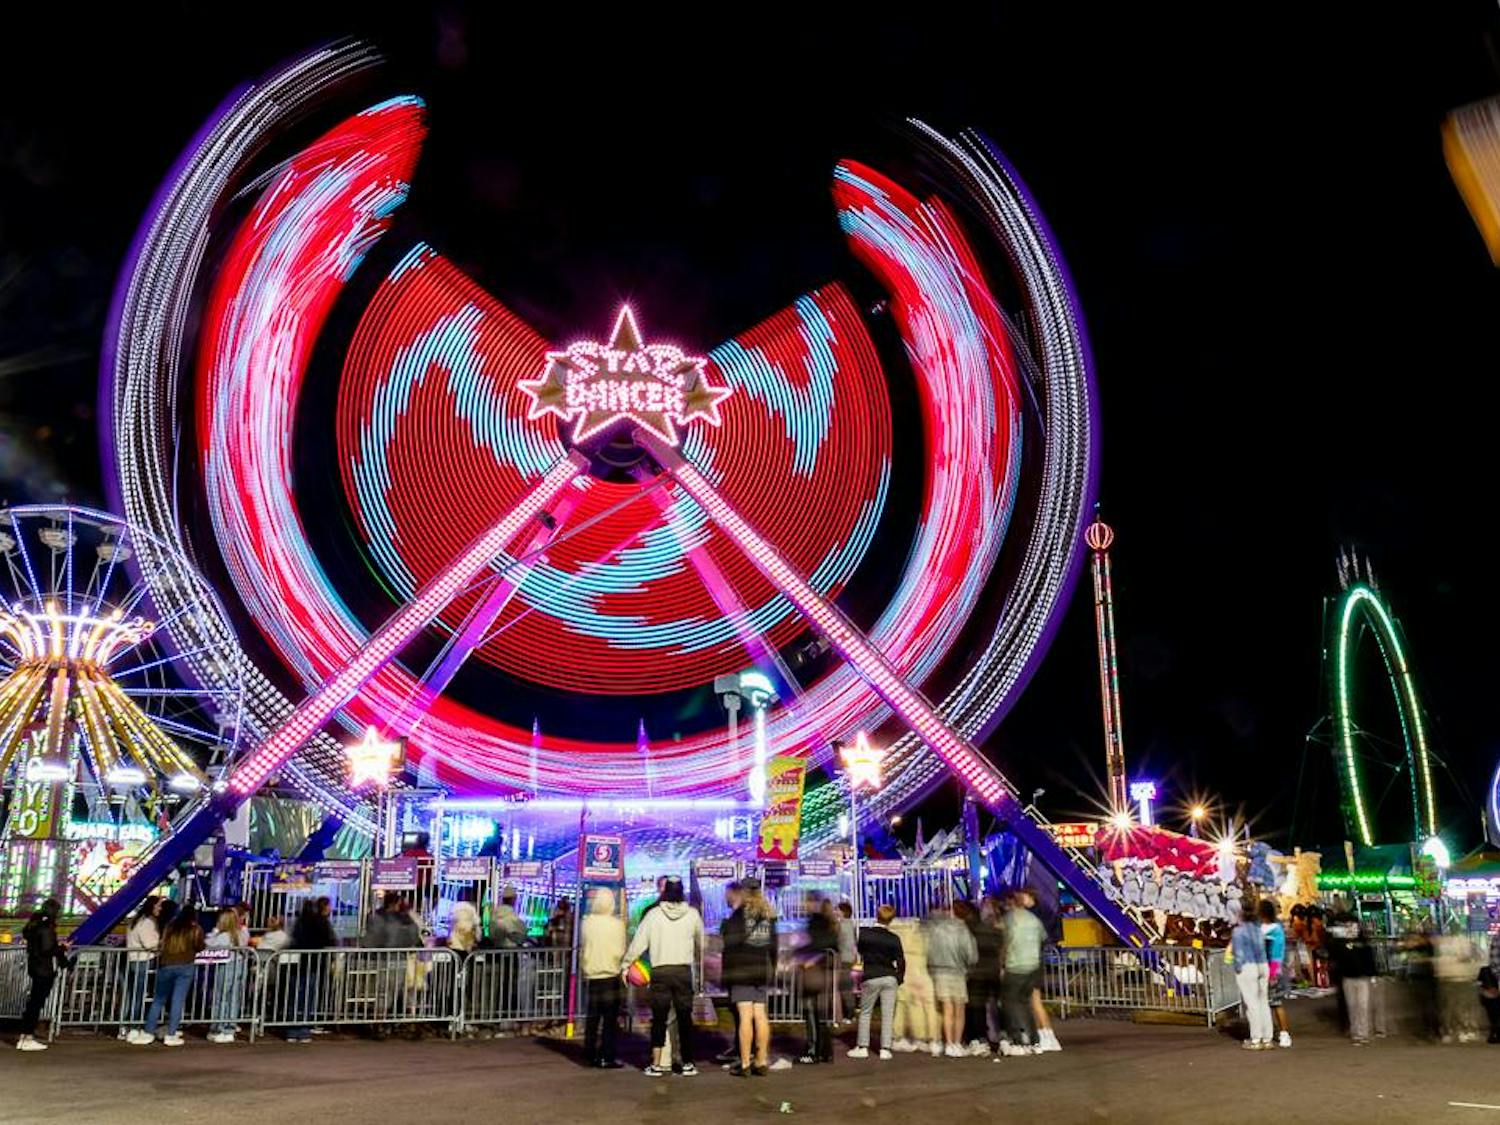 The over 70-foot-tall Star Dancer ride spins riders around at the South Carolina State Fair on Oct. 18, 2023. The ride holds up to 16 people at a time and spins up to 360 degrees both vertically and horizontally.